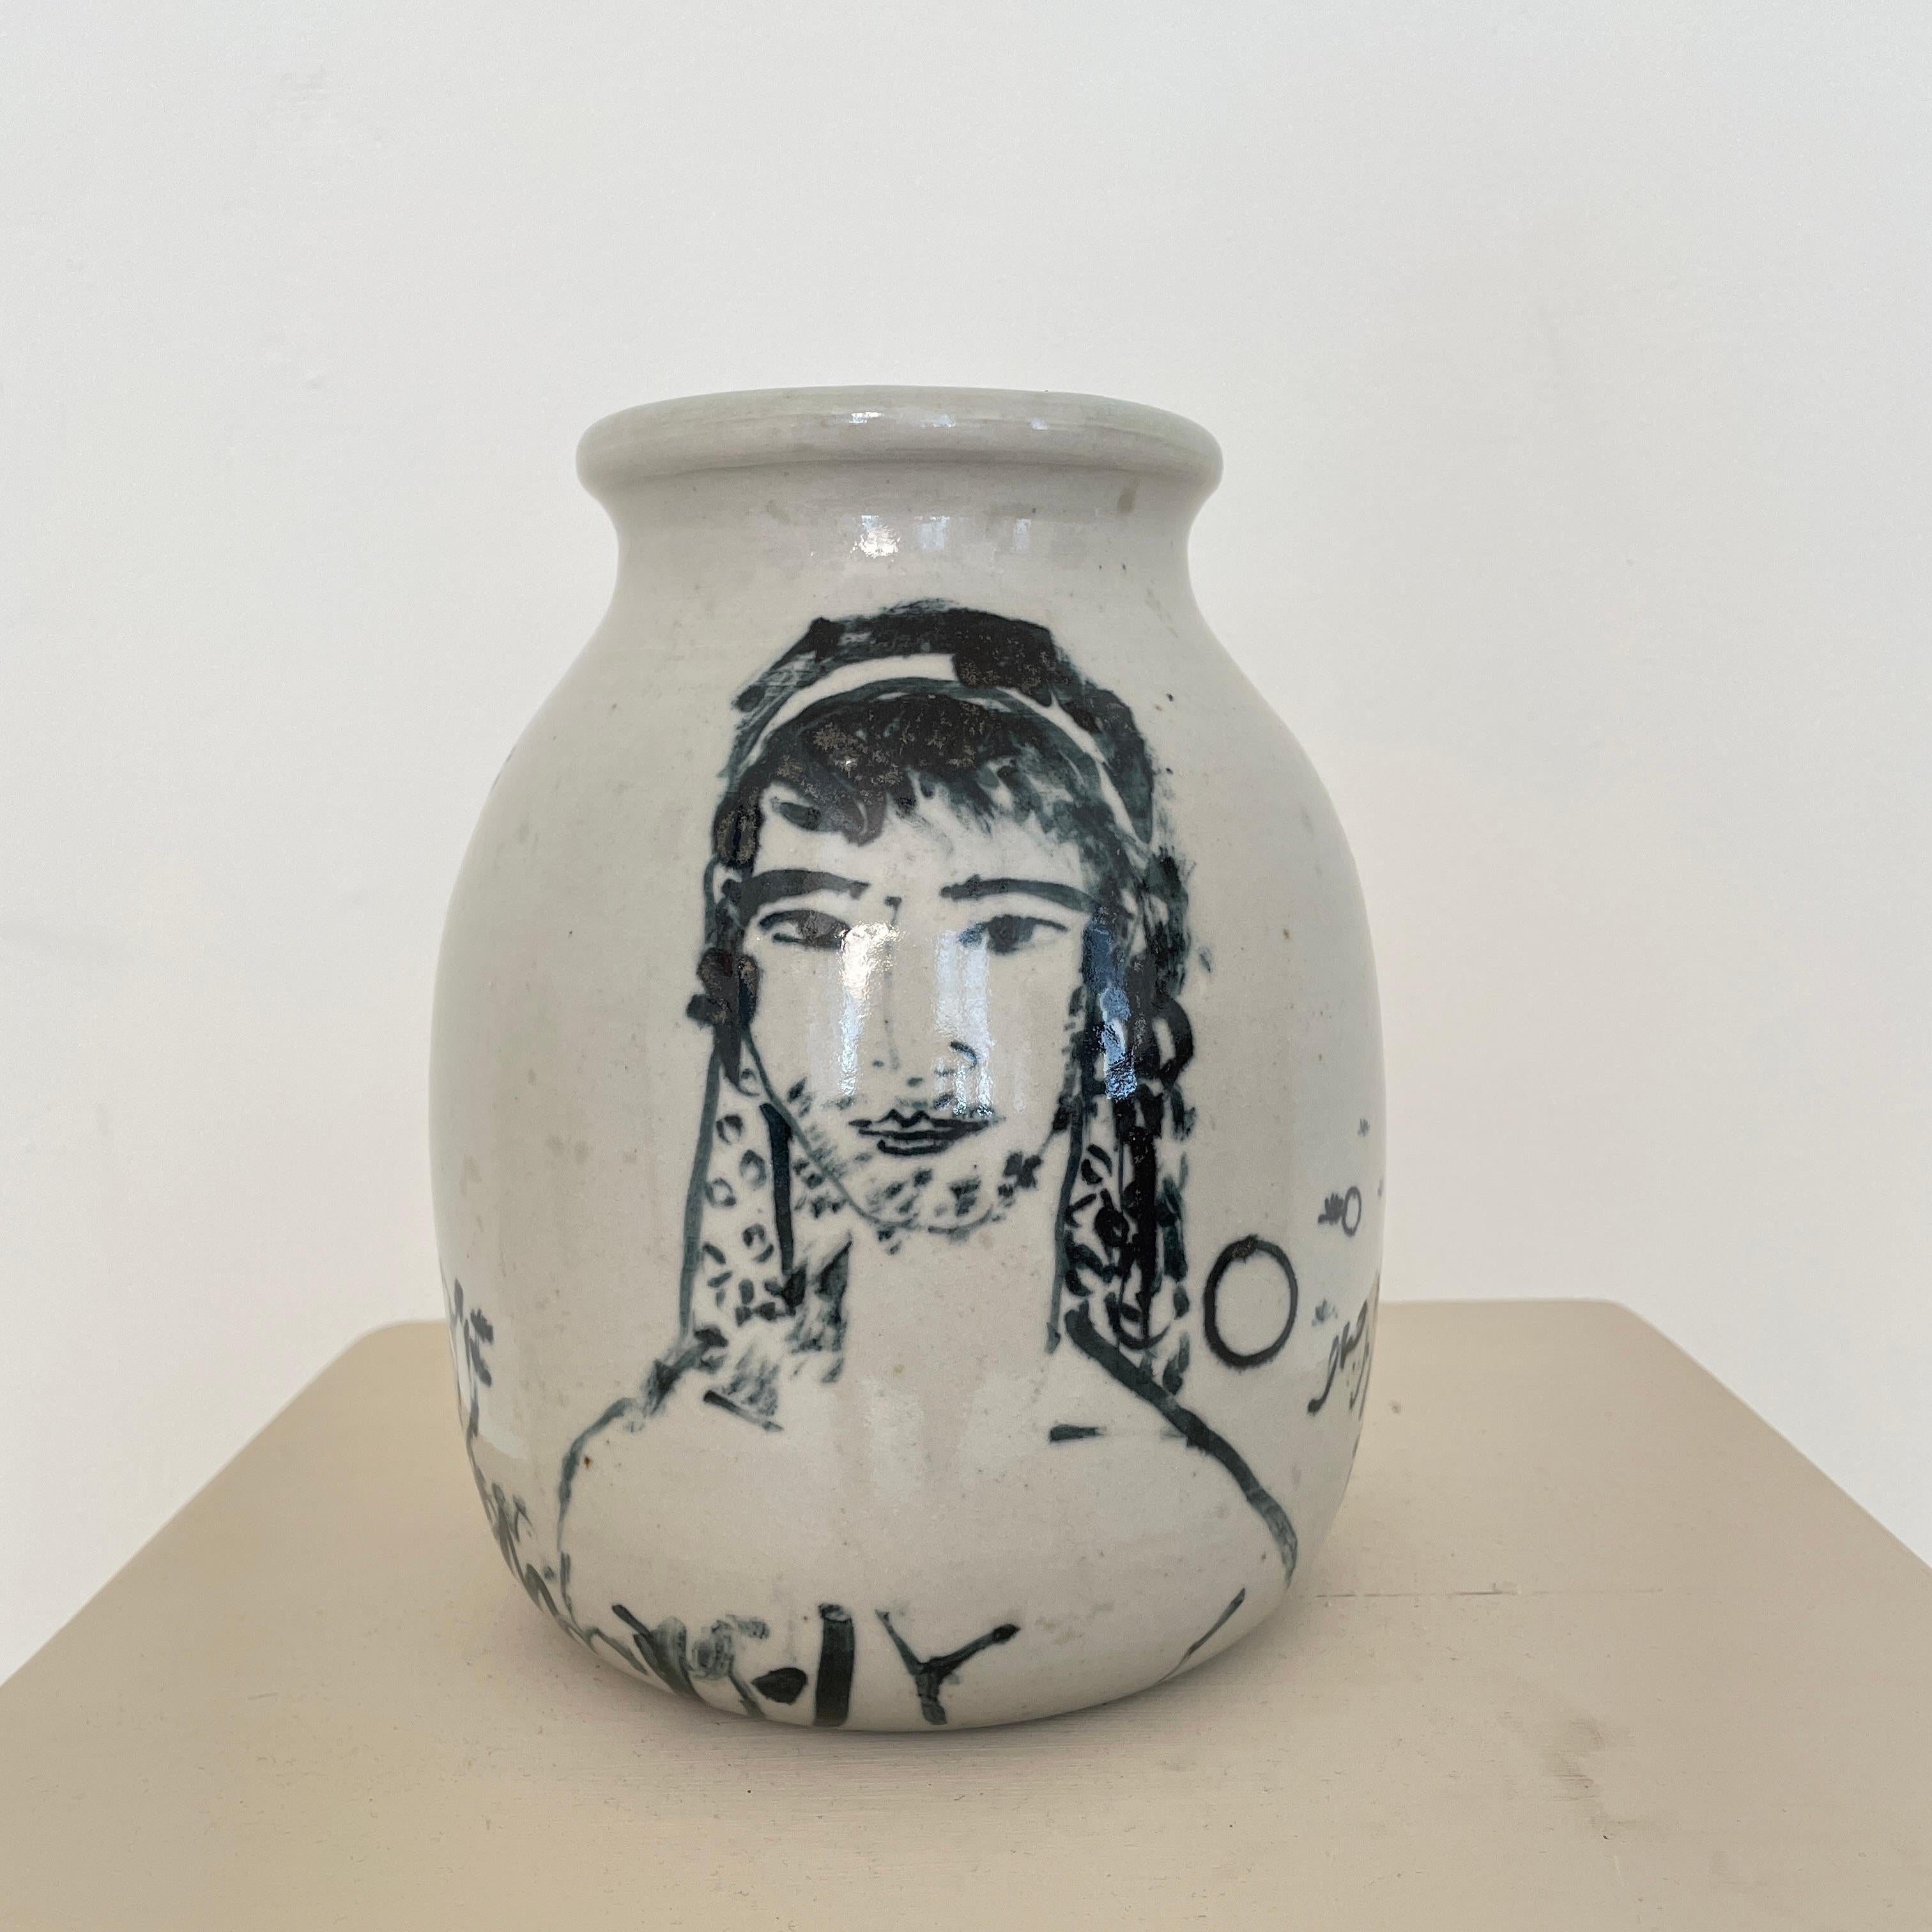 This beautiful Italian stoneware vase was hand painted and finally glazed. It was made around 1970.
You can see in black on a gray background a woman's and a man's head, next to some floral decorations.
A unique piece which is a great eye-catcher